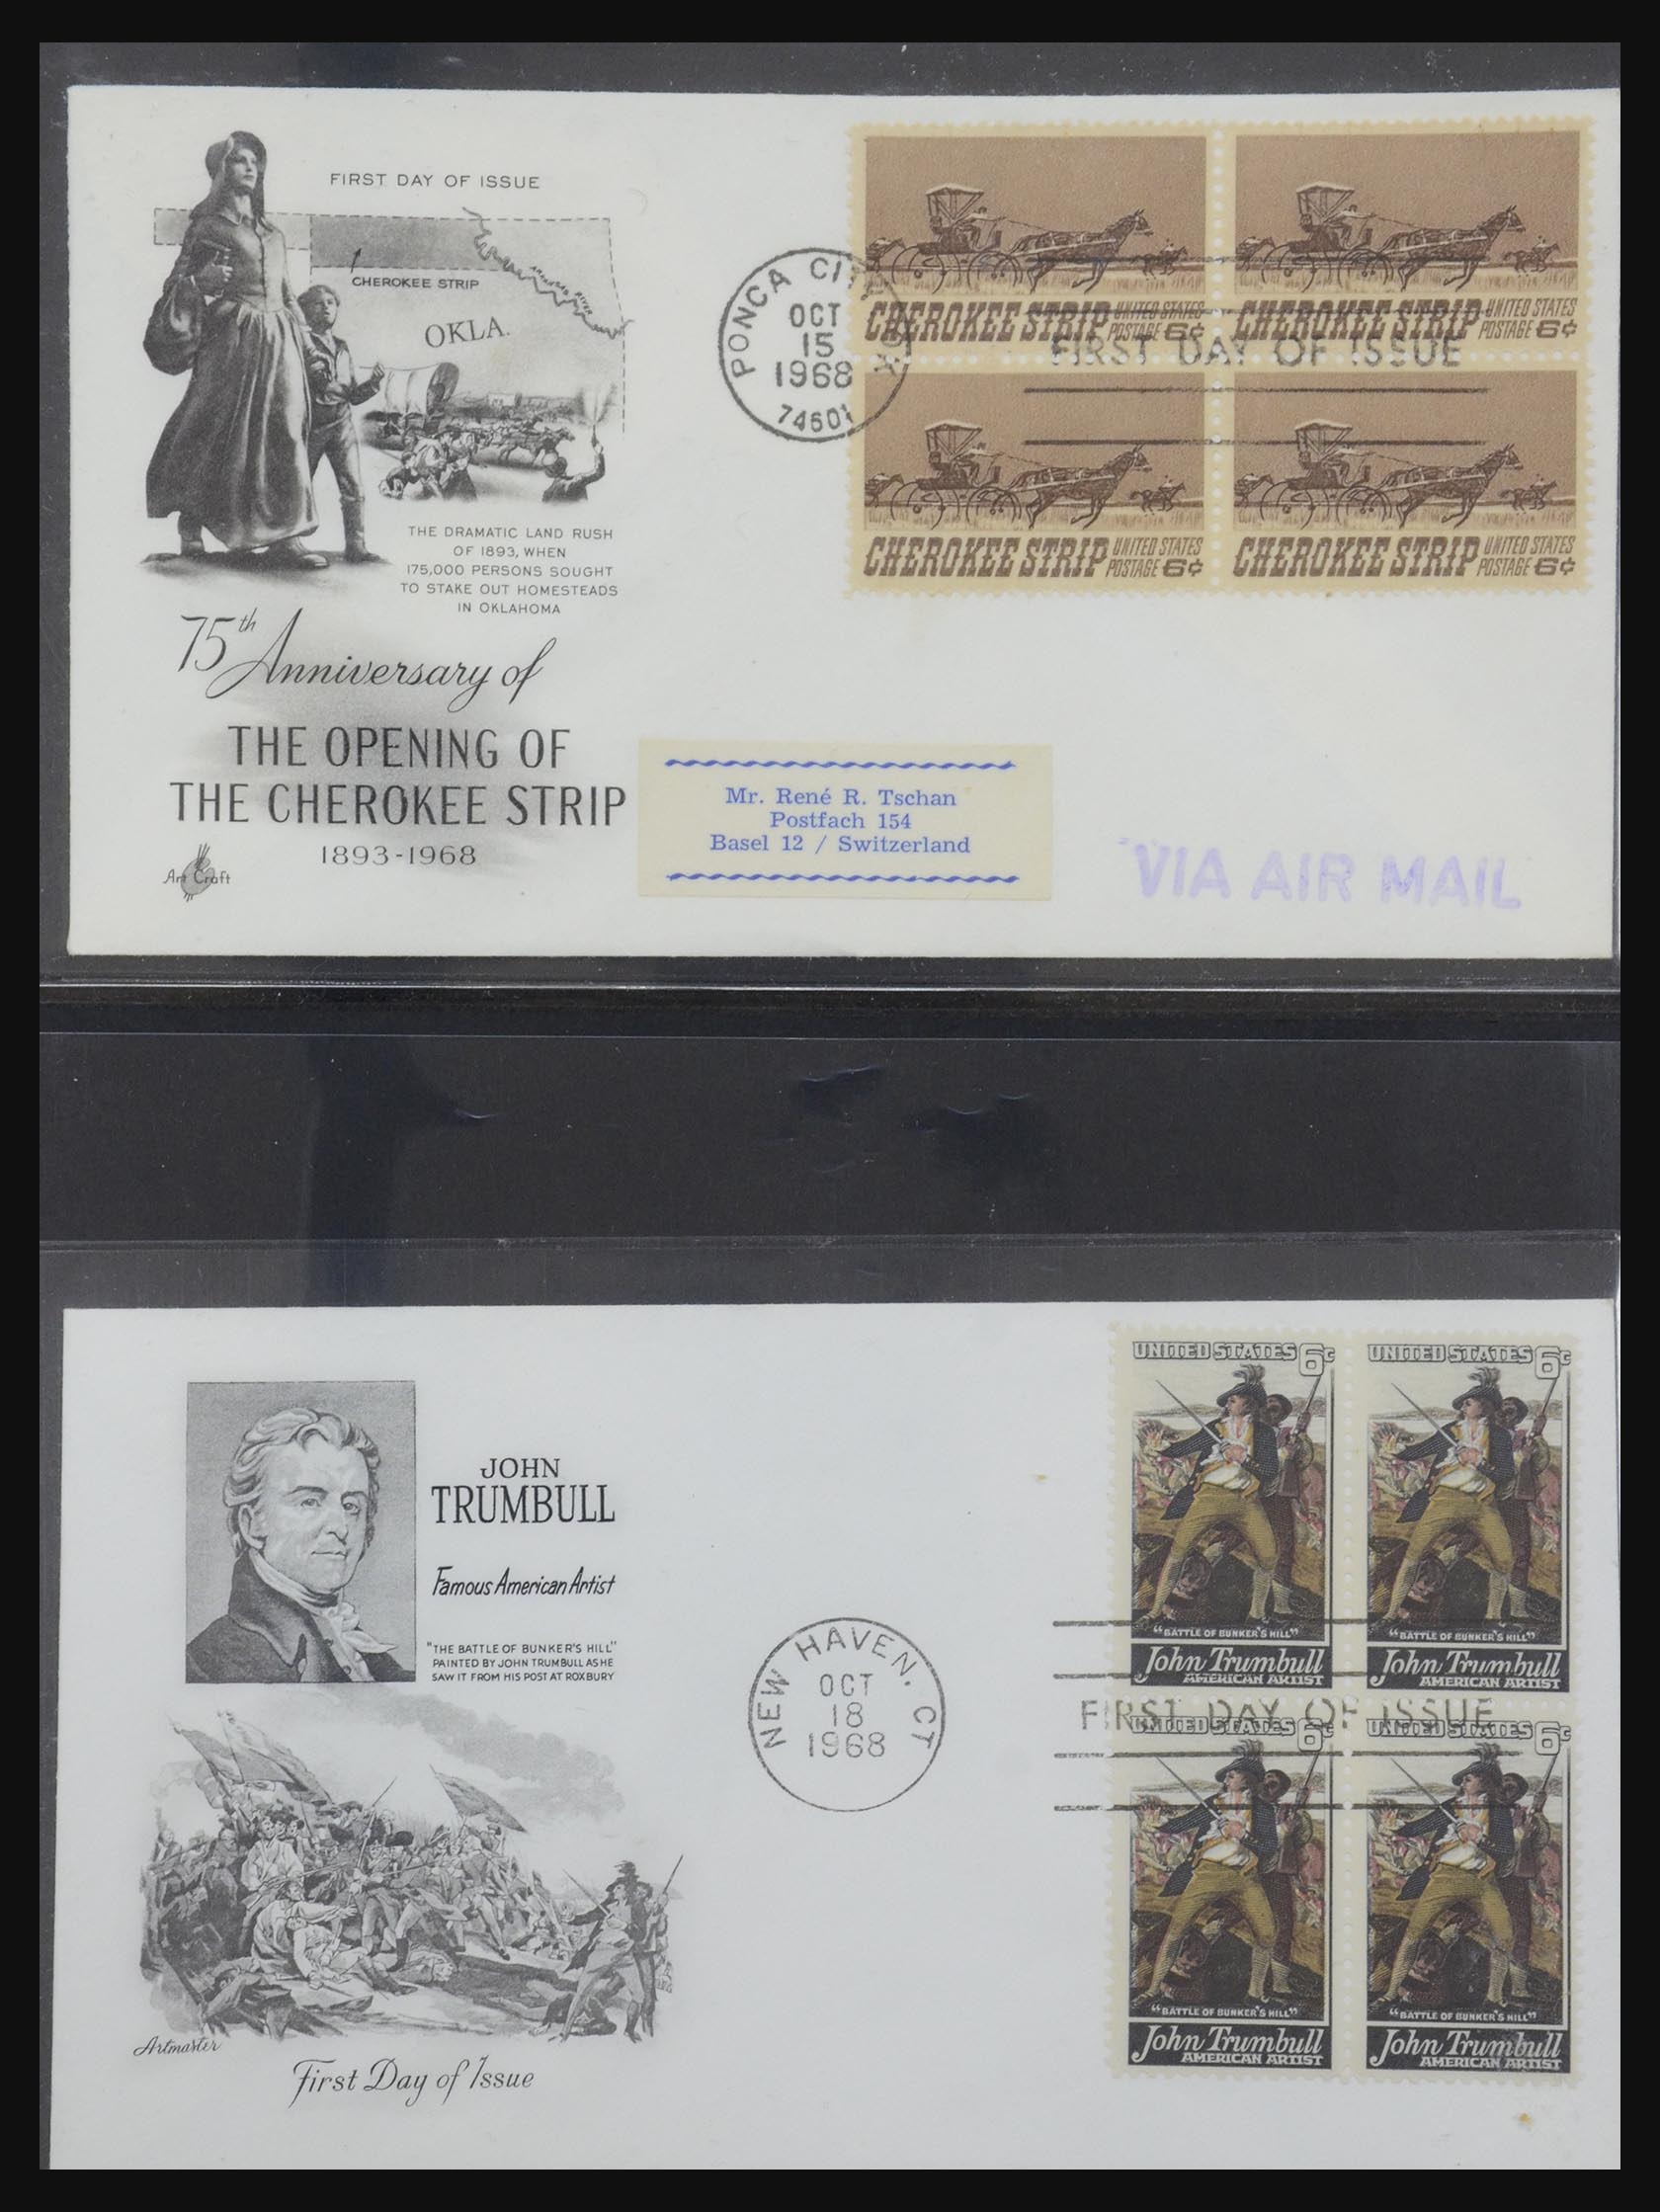 31913 0067 - 31913 USA fdc-collectie 1945-1990.